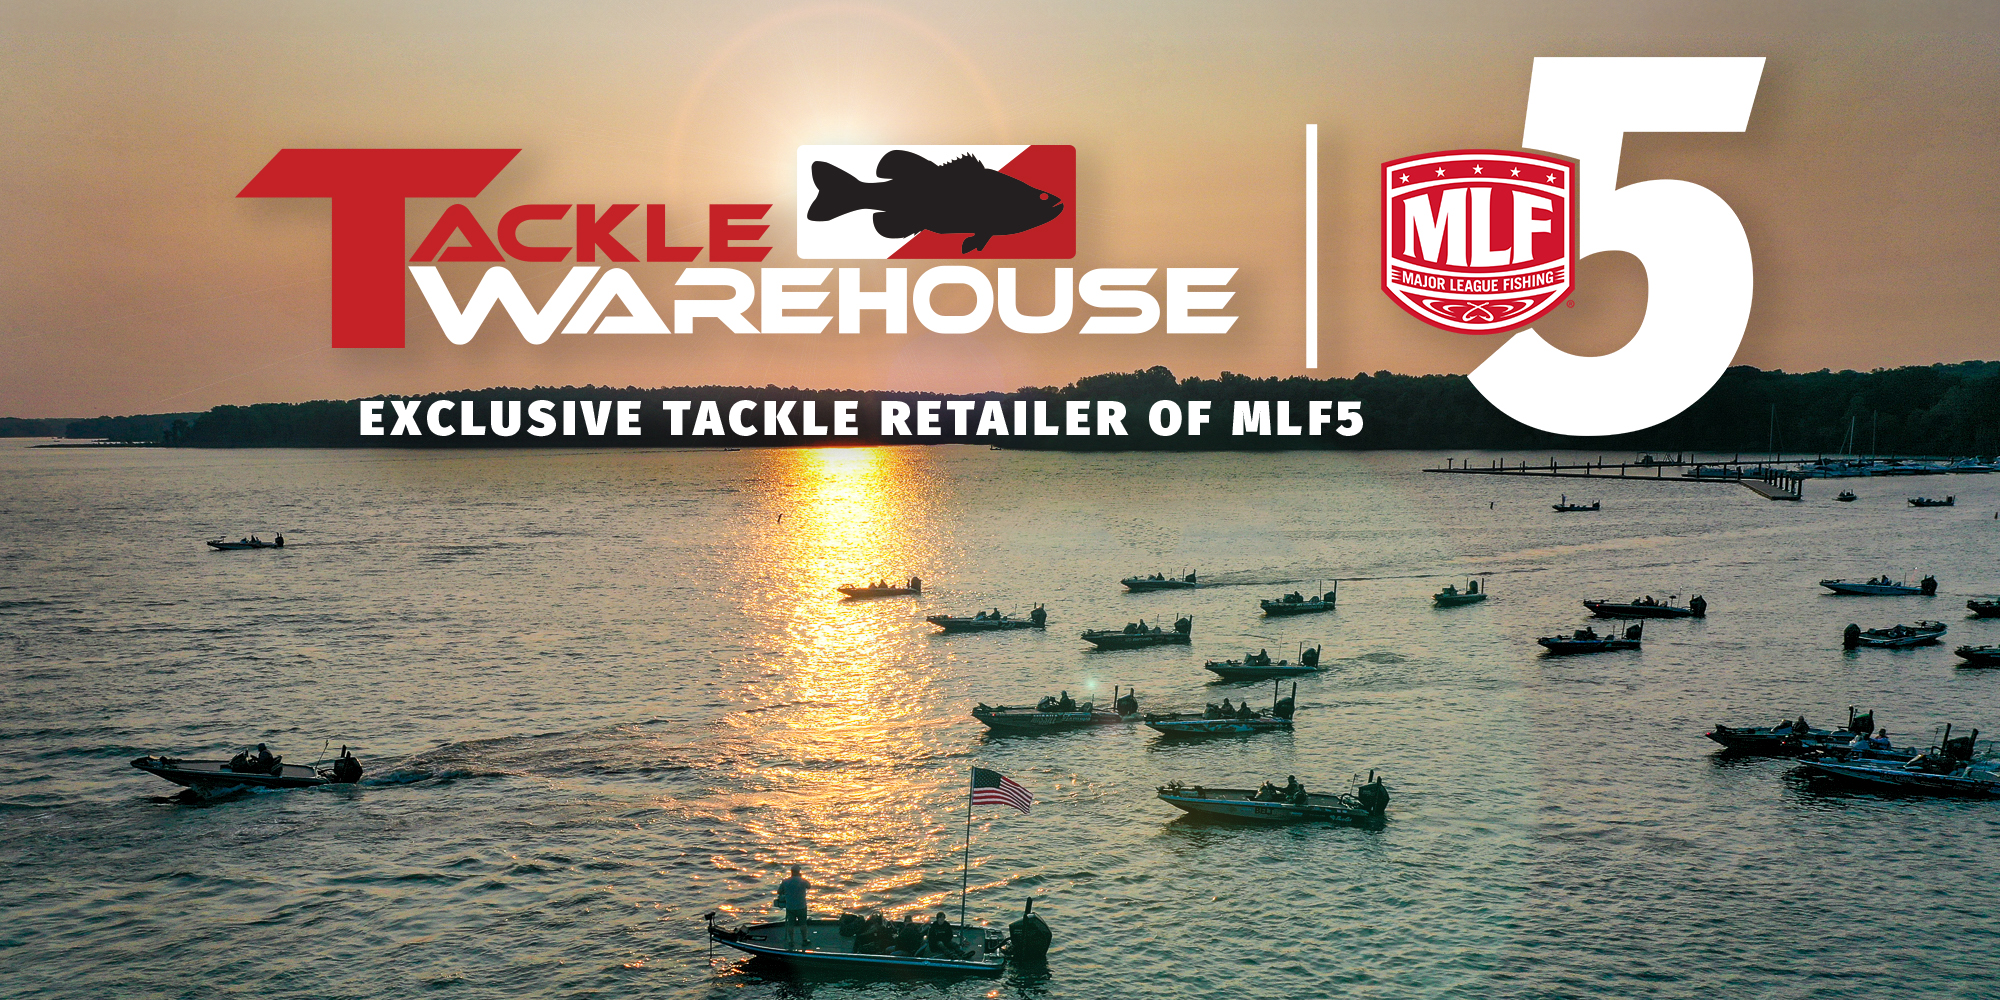 Tackle Warehouse renews and expands sponsorship agreement with